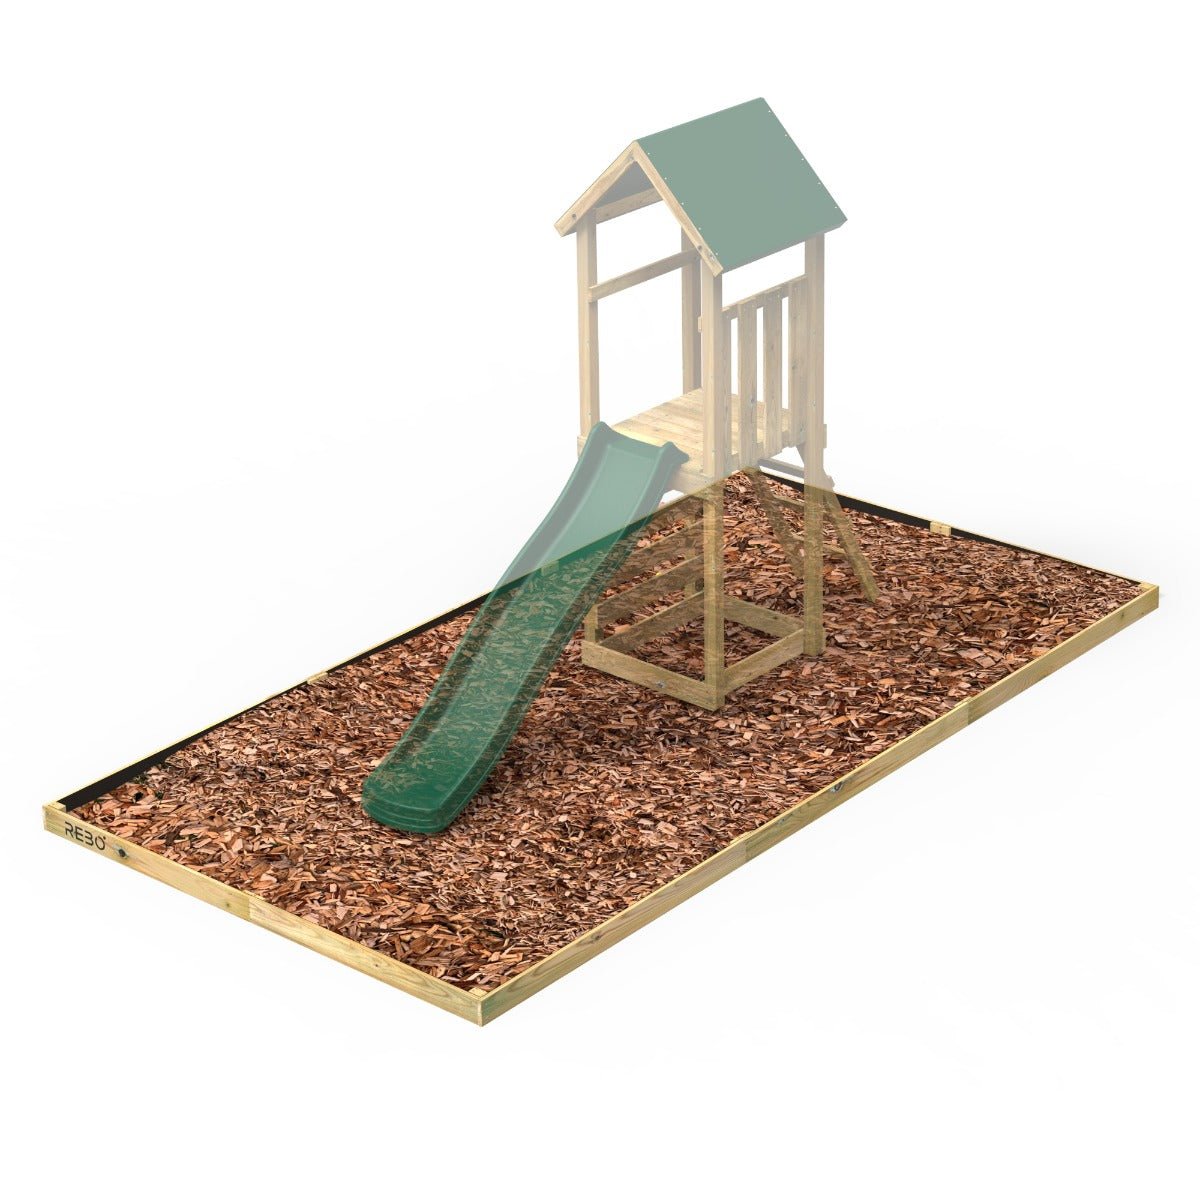 Rebo Safety Play Area Protective Bark Wood Chip Kit - 2.6M x 5.1M